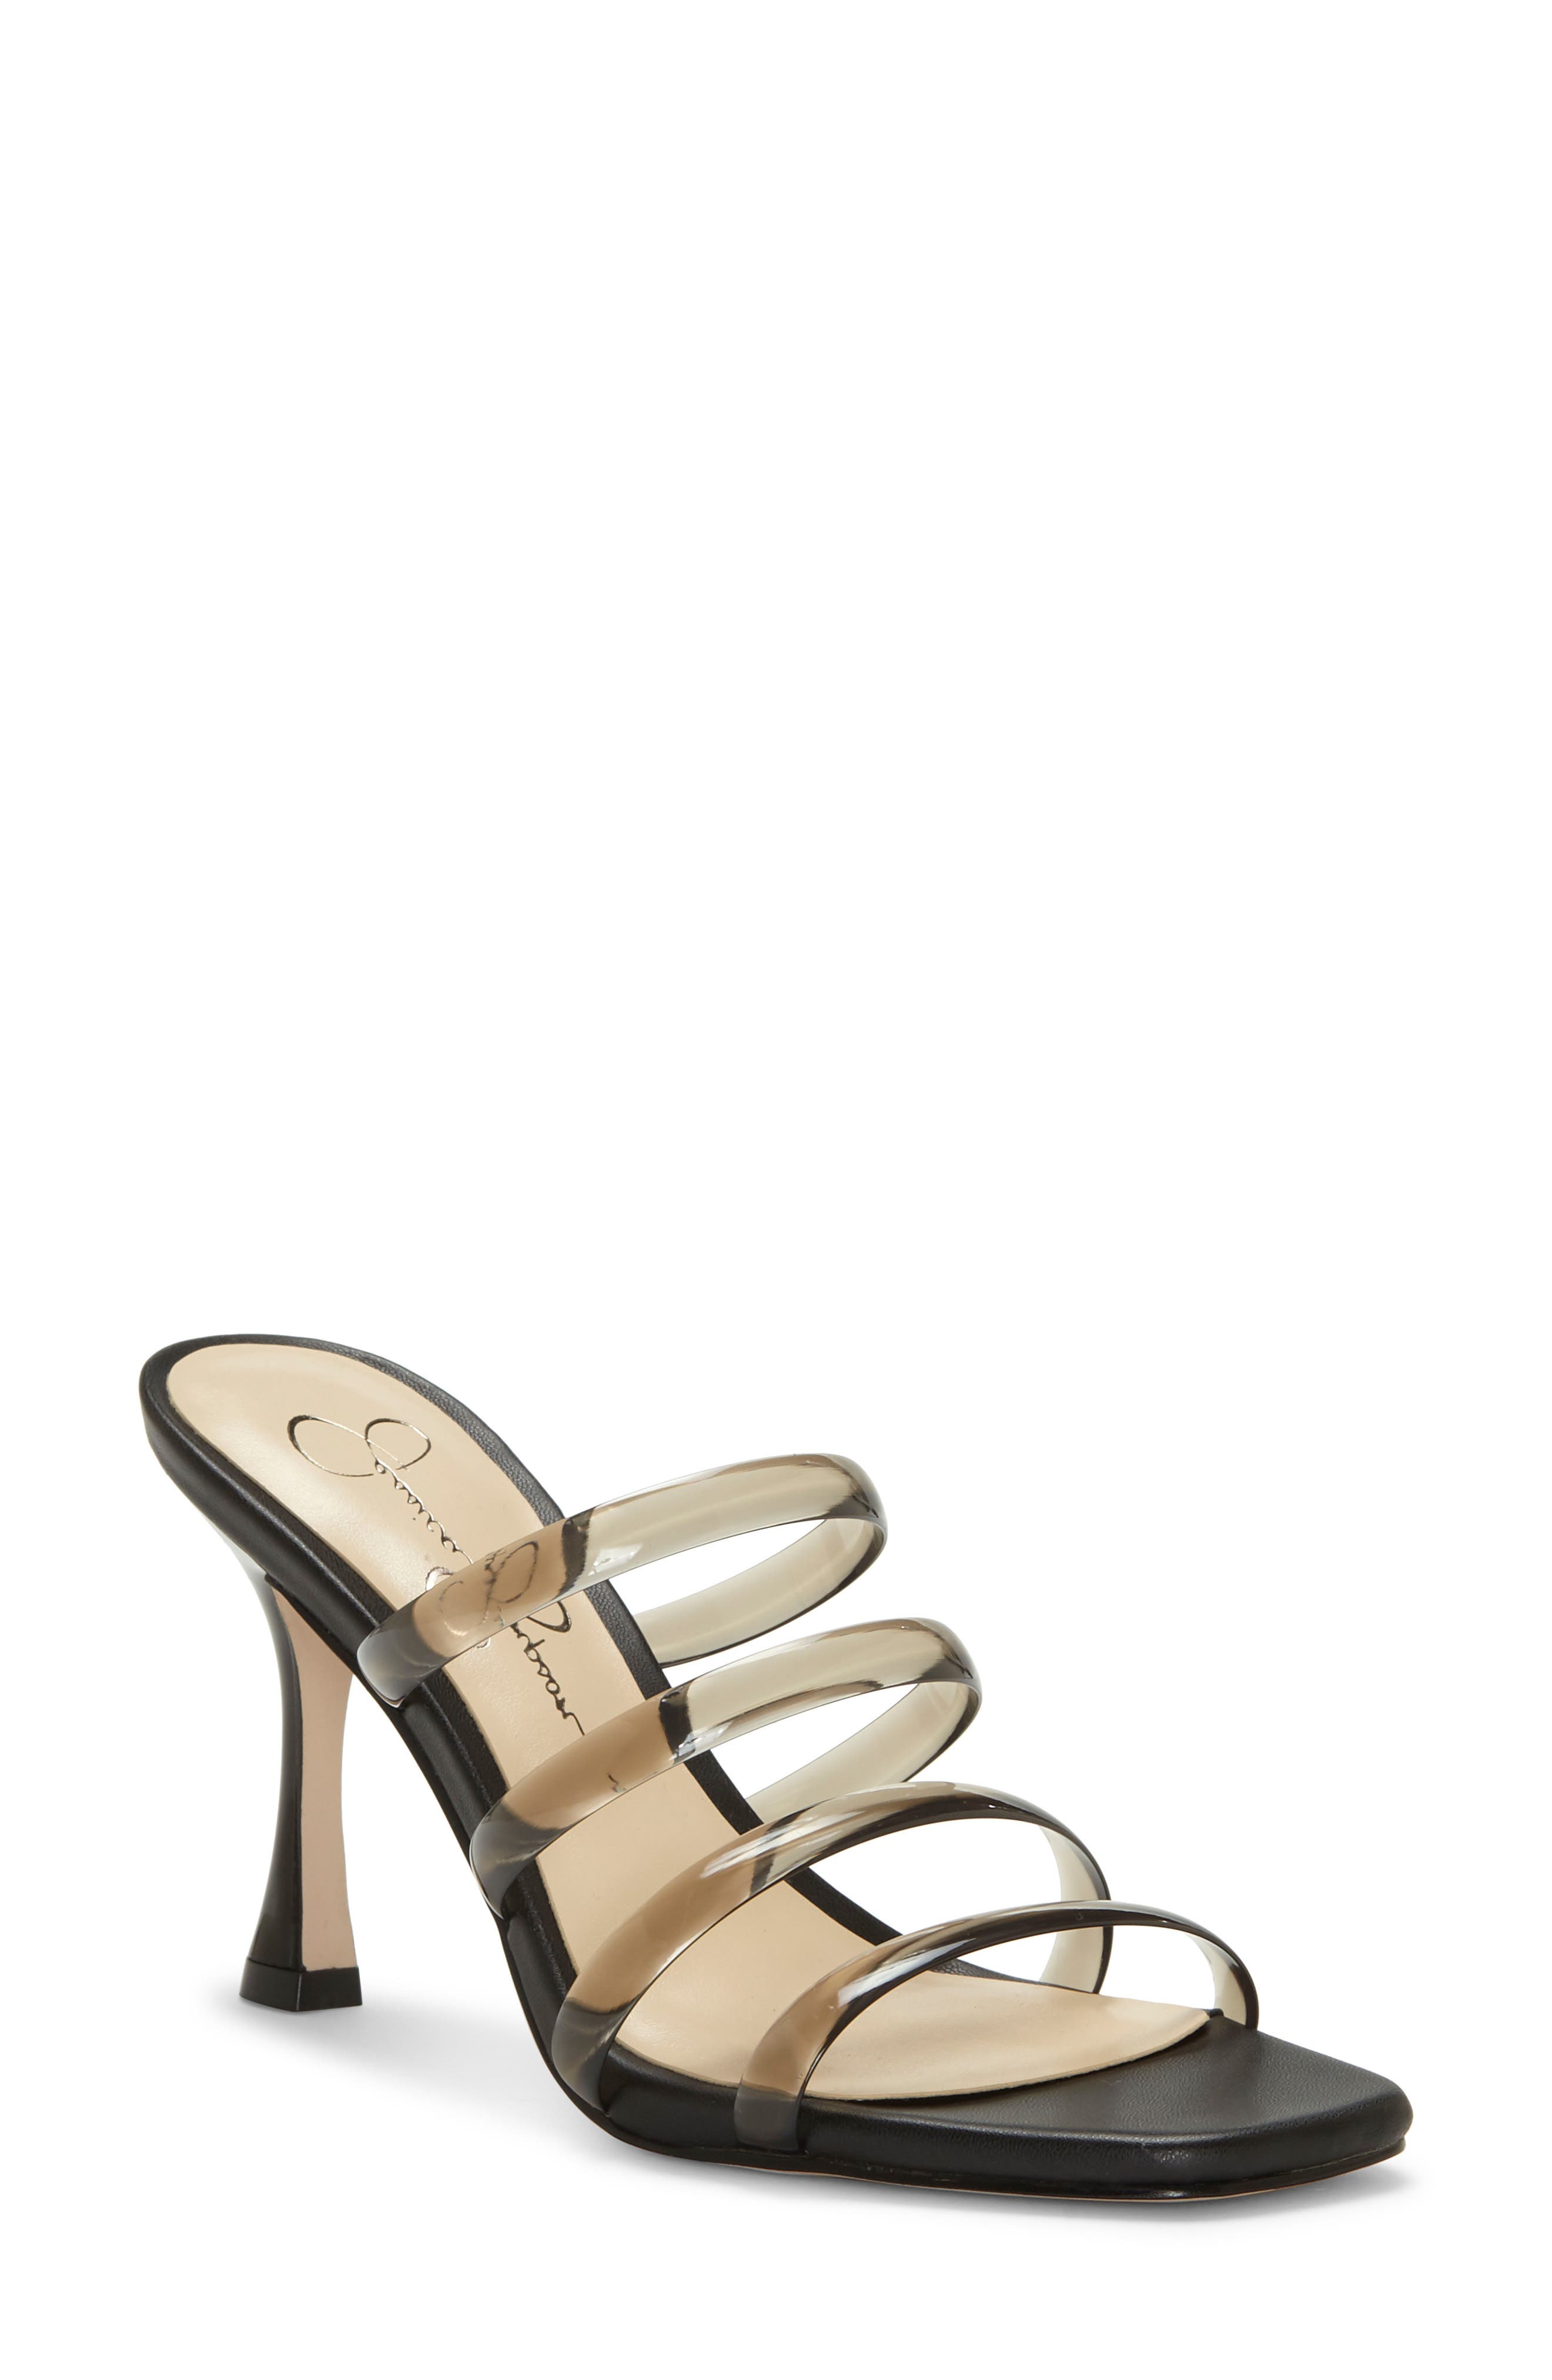 jessica simpson shoes clear